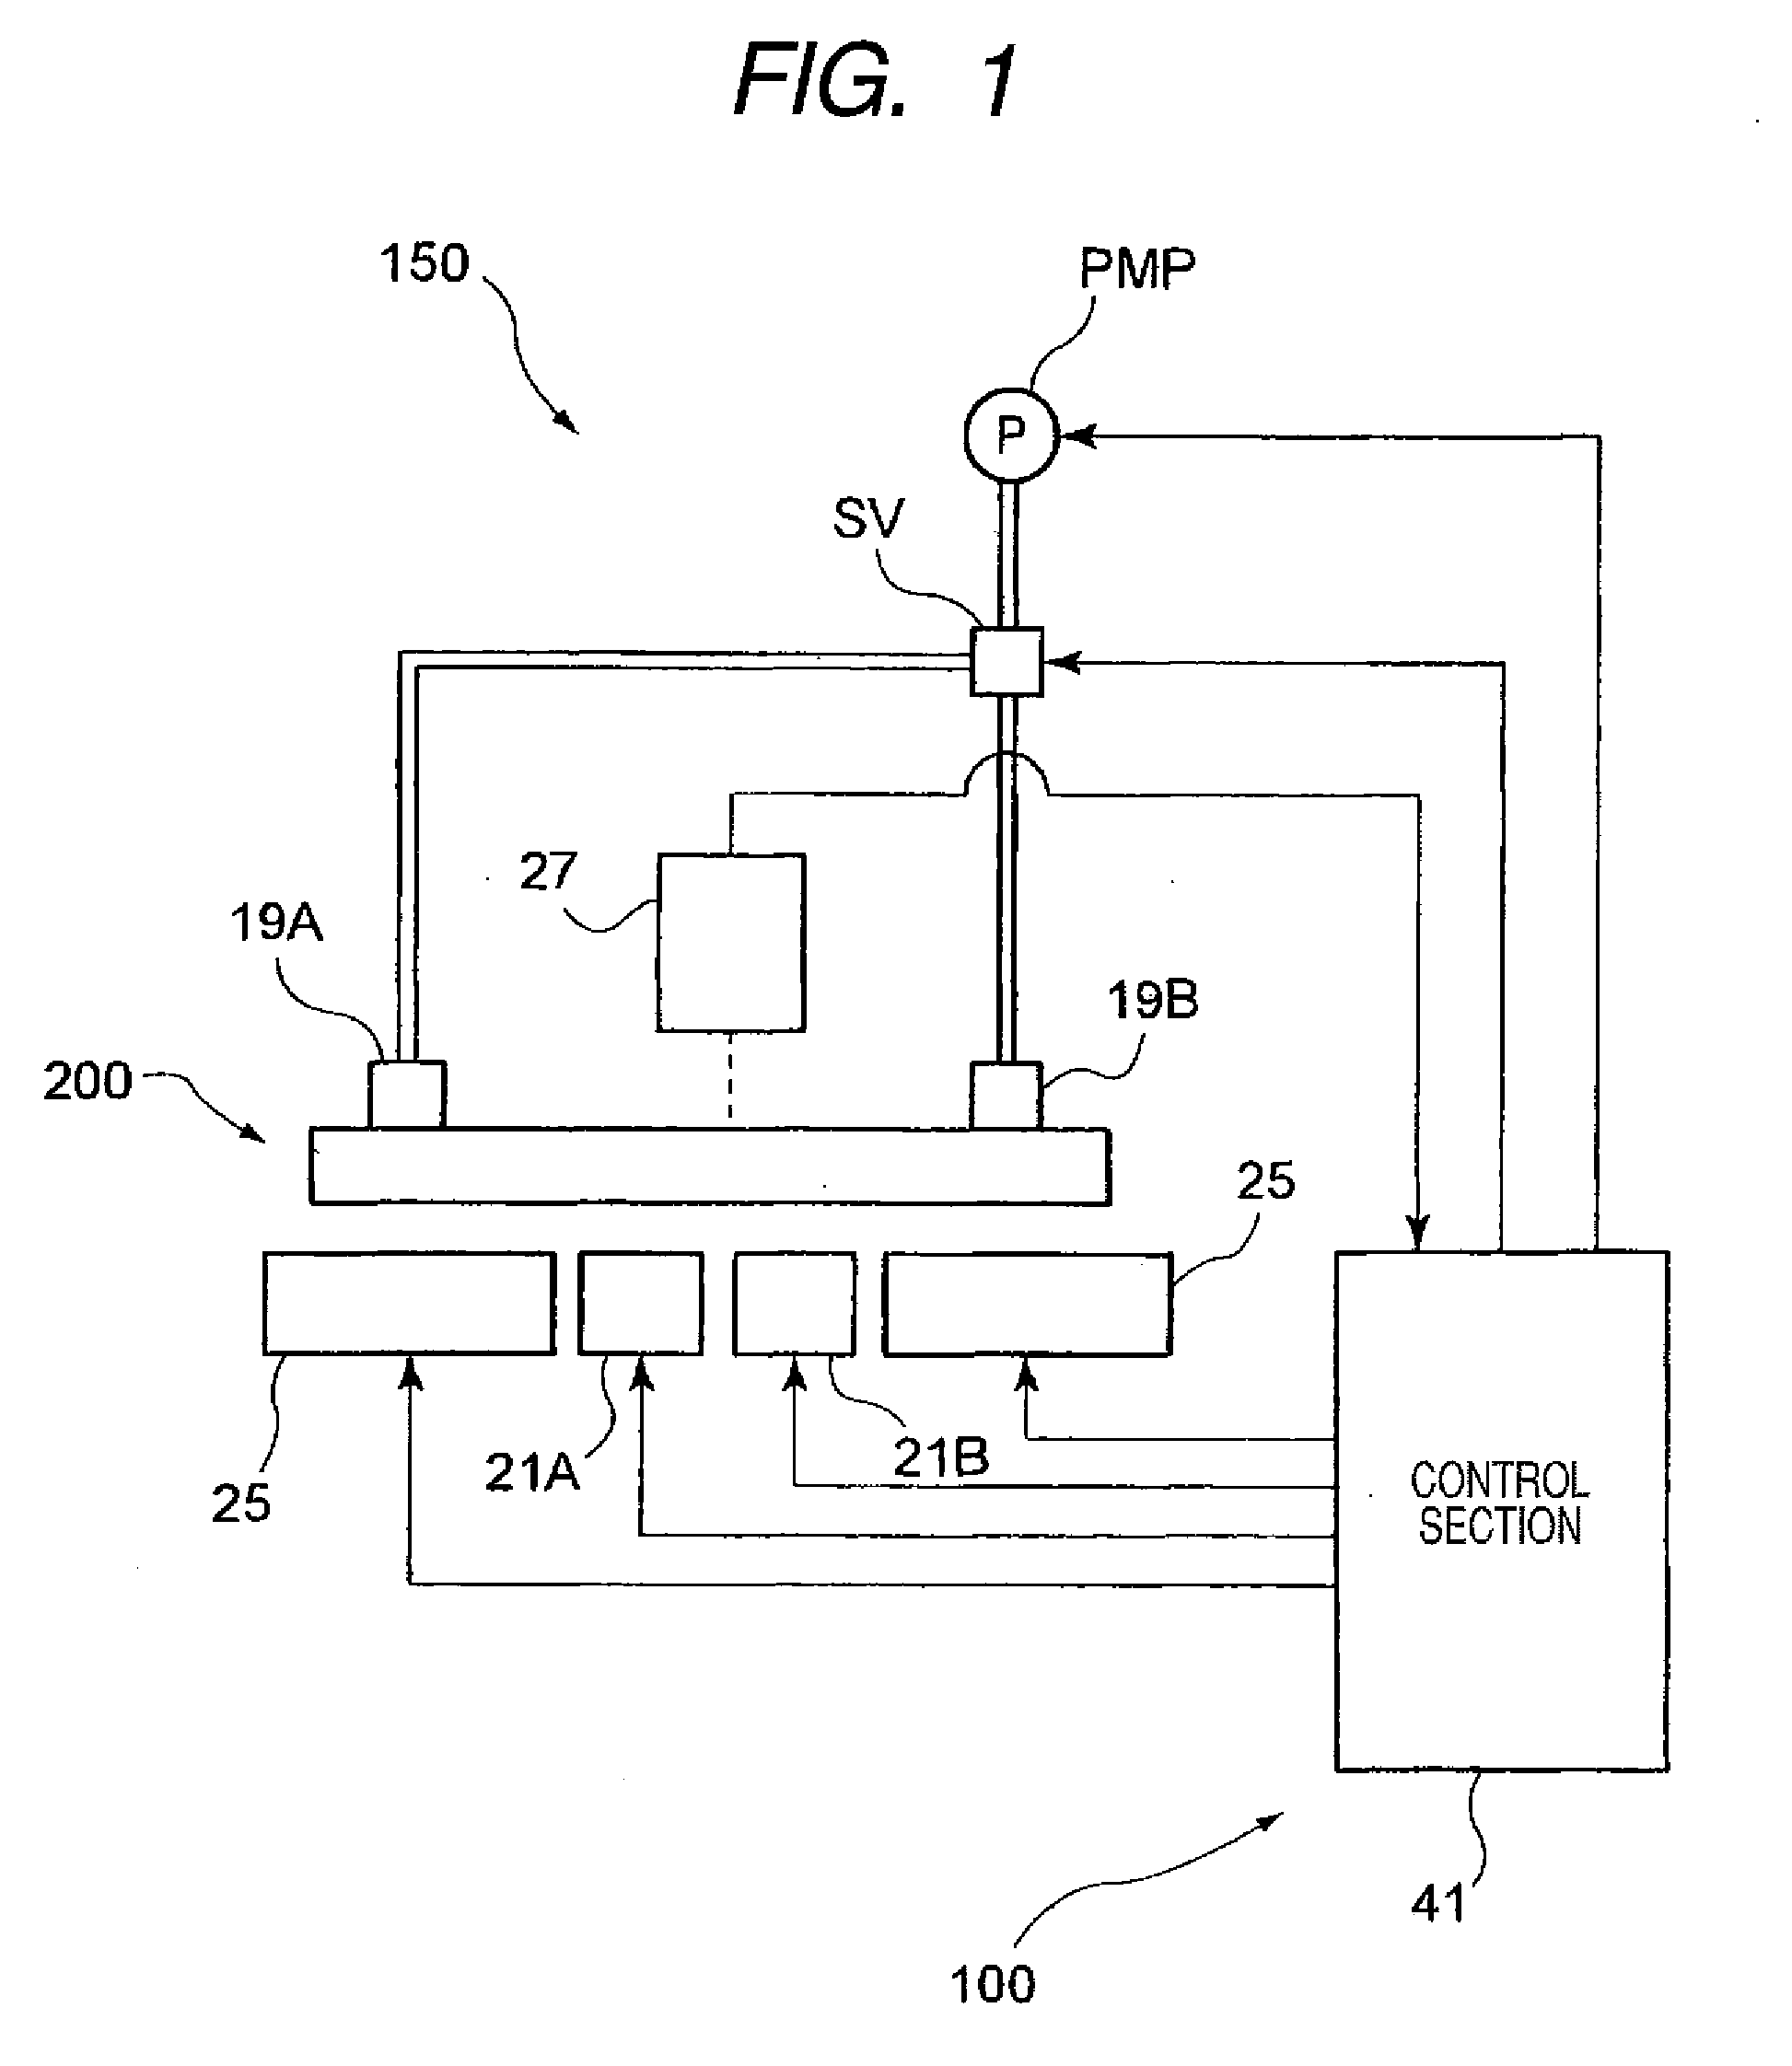 Intra-microchannel mixing method and apparatus